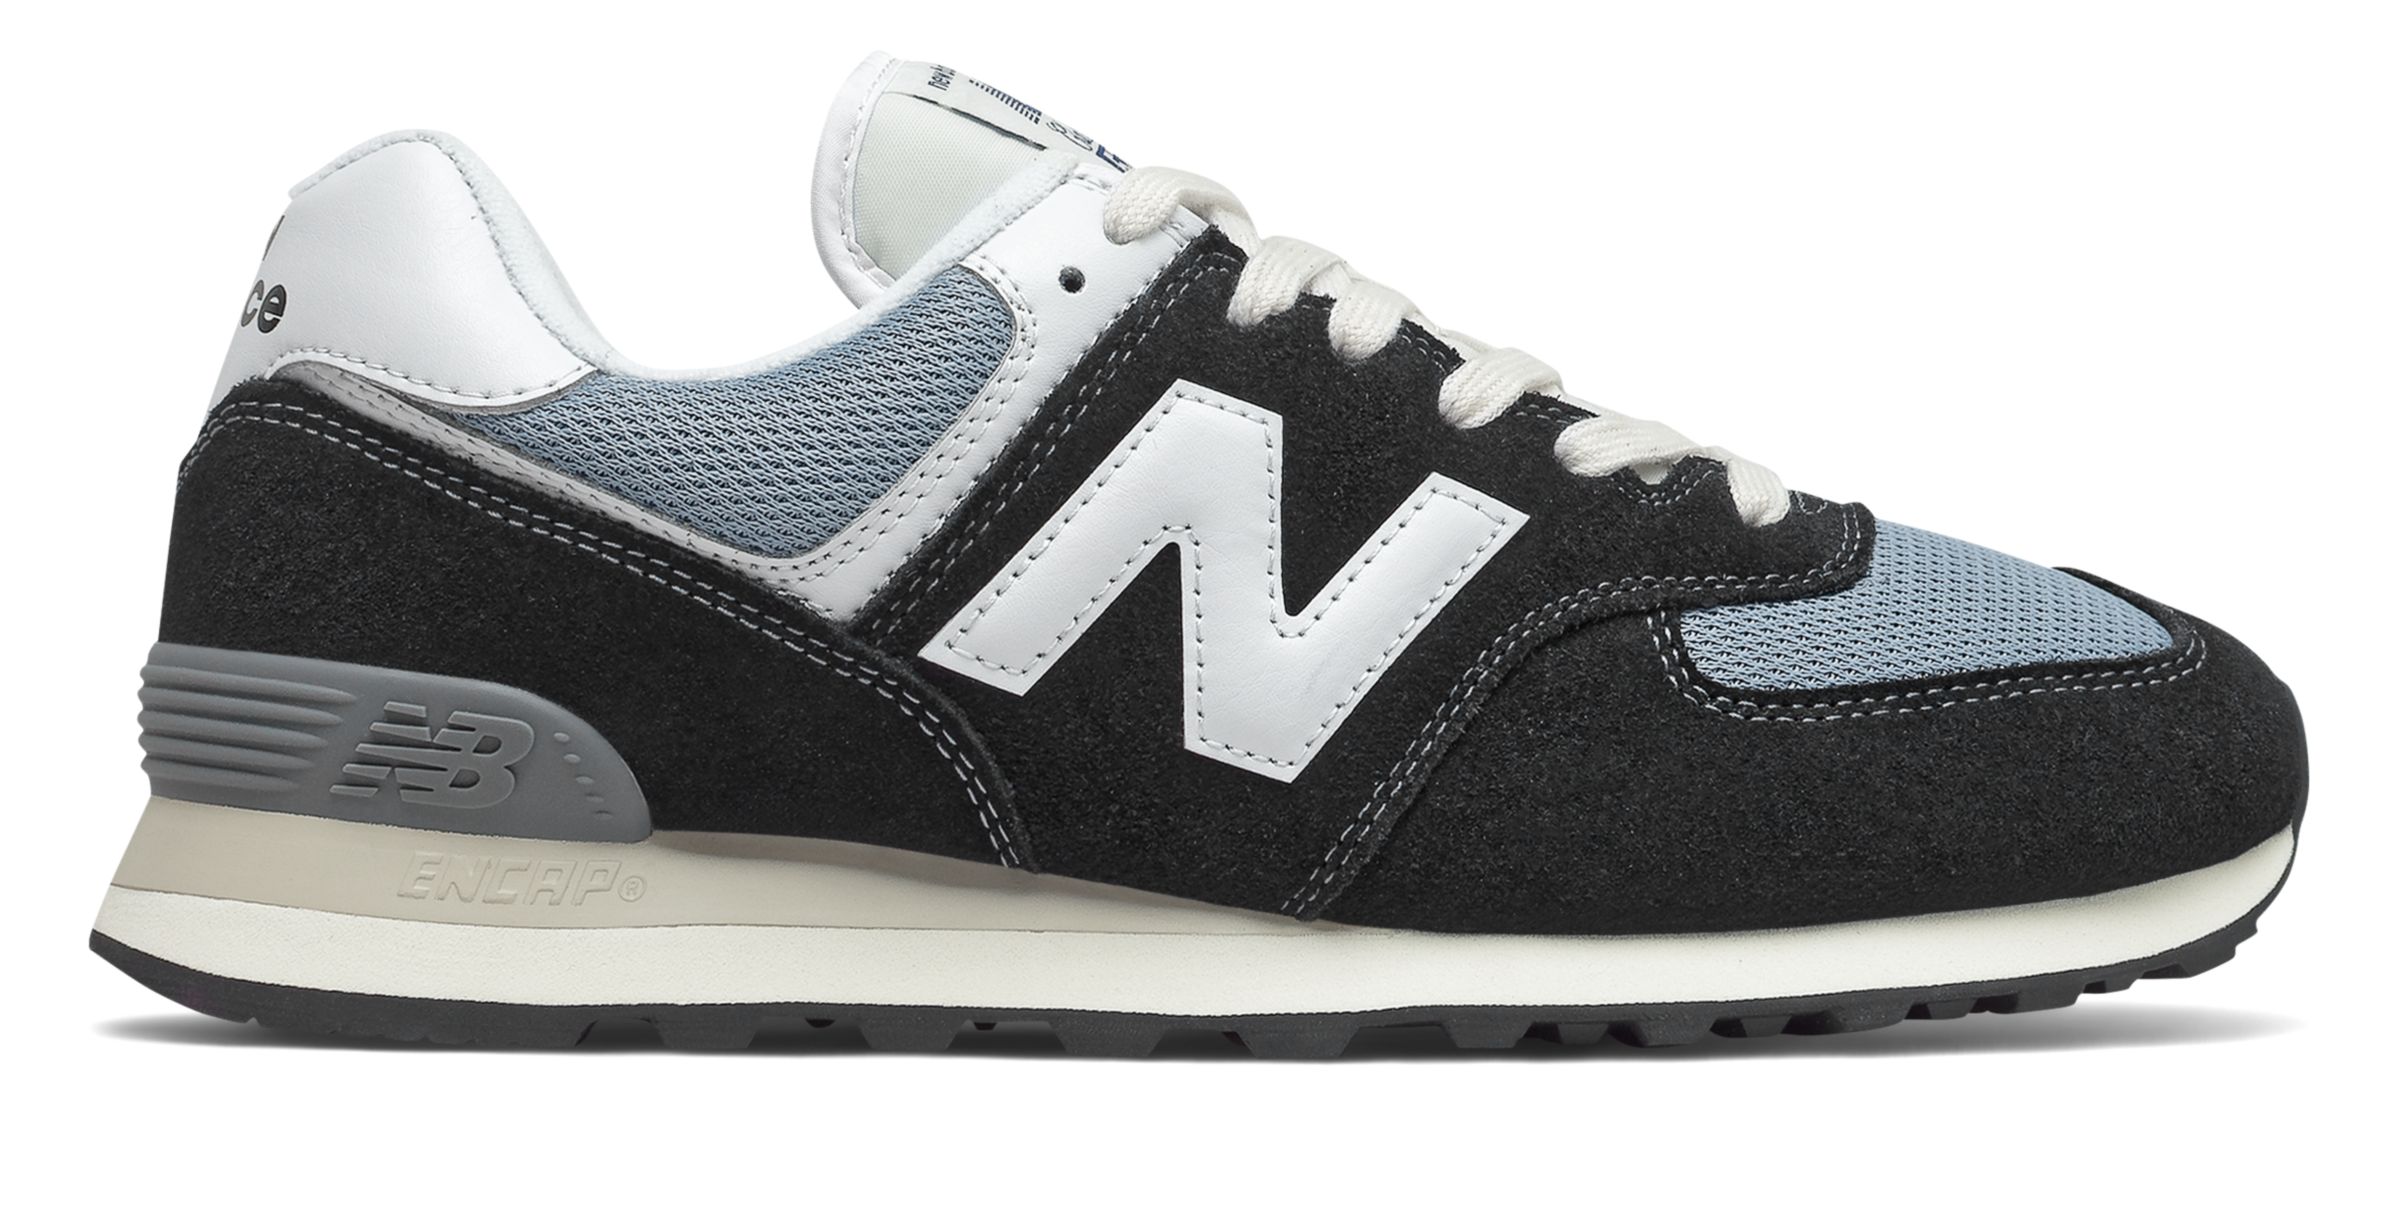 Men's 574 Trainers Collection - New Balance